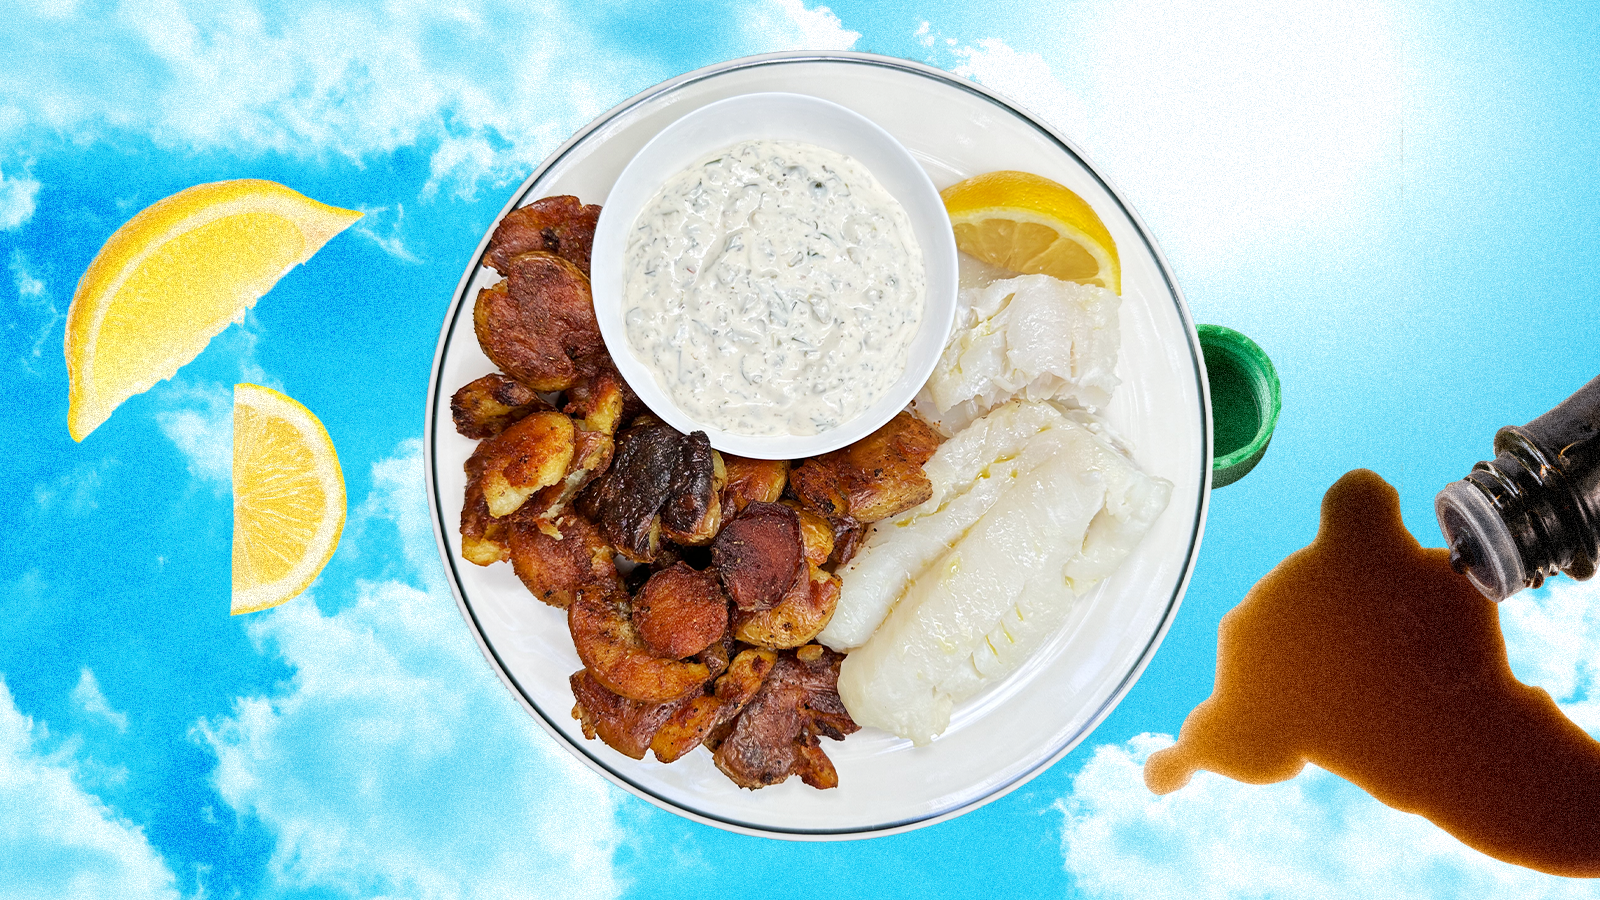 A plate of cod and fried potatoes and tartar sauce, garnished with a lemon on a cloudy sky backdrop